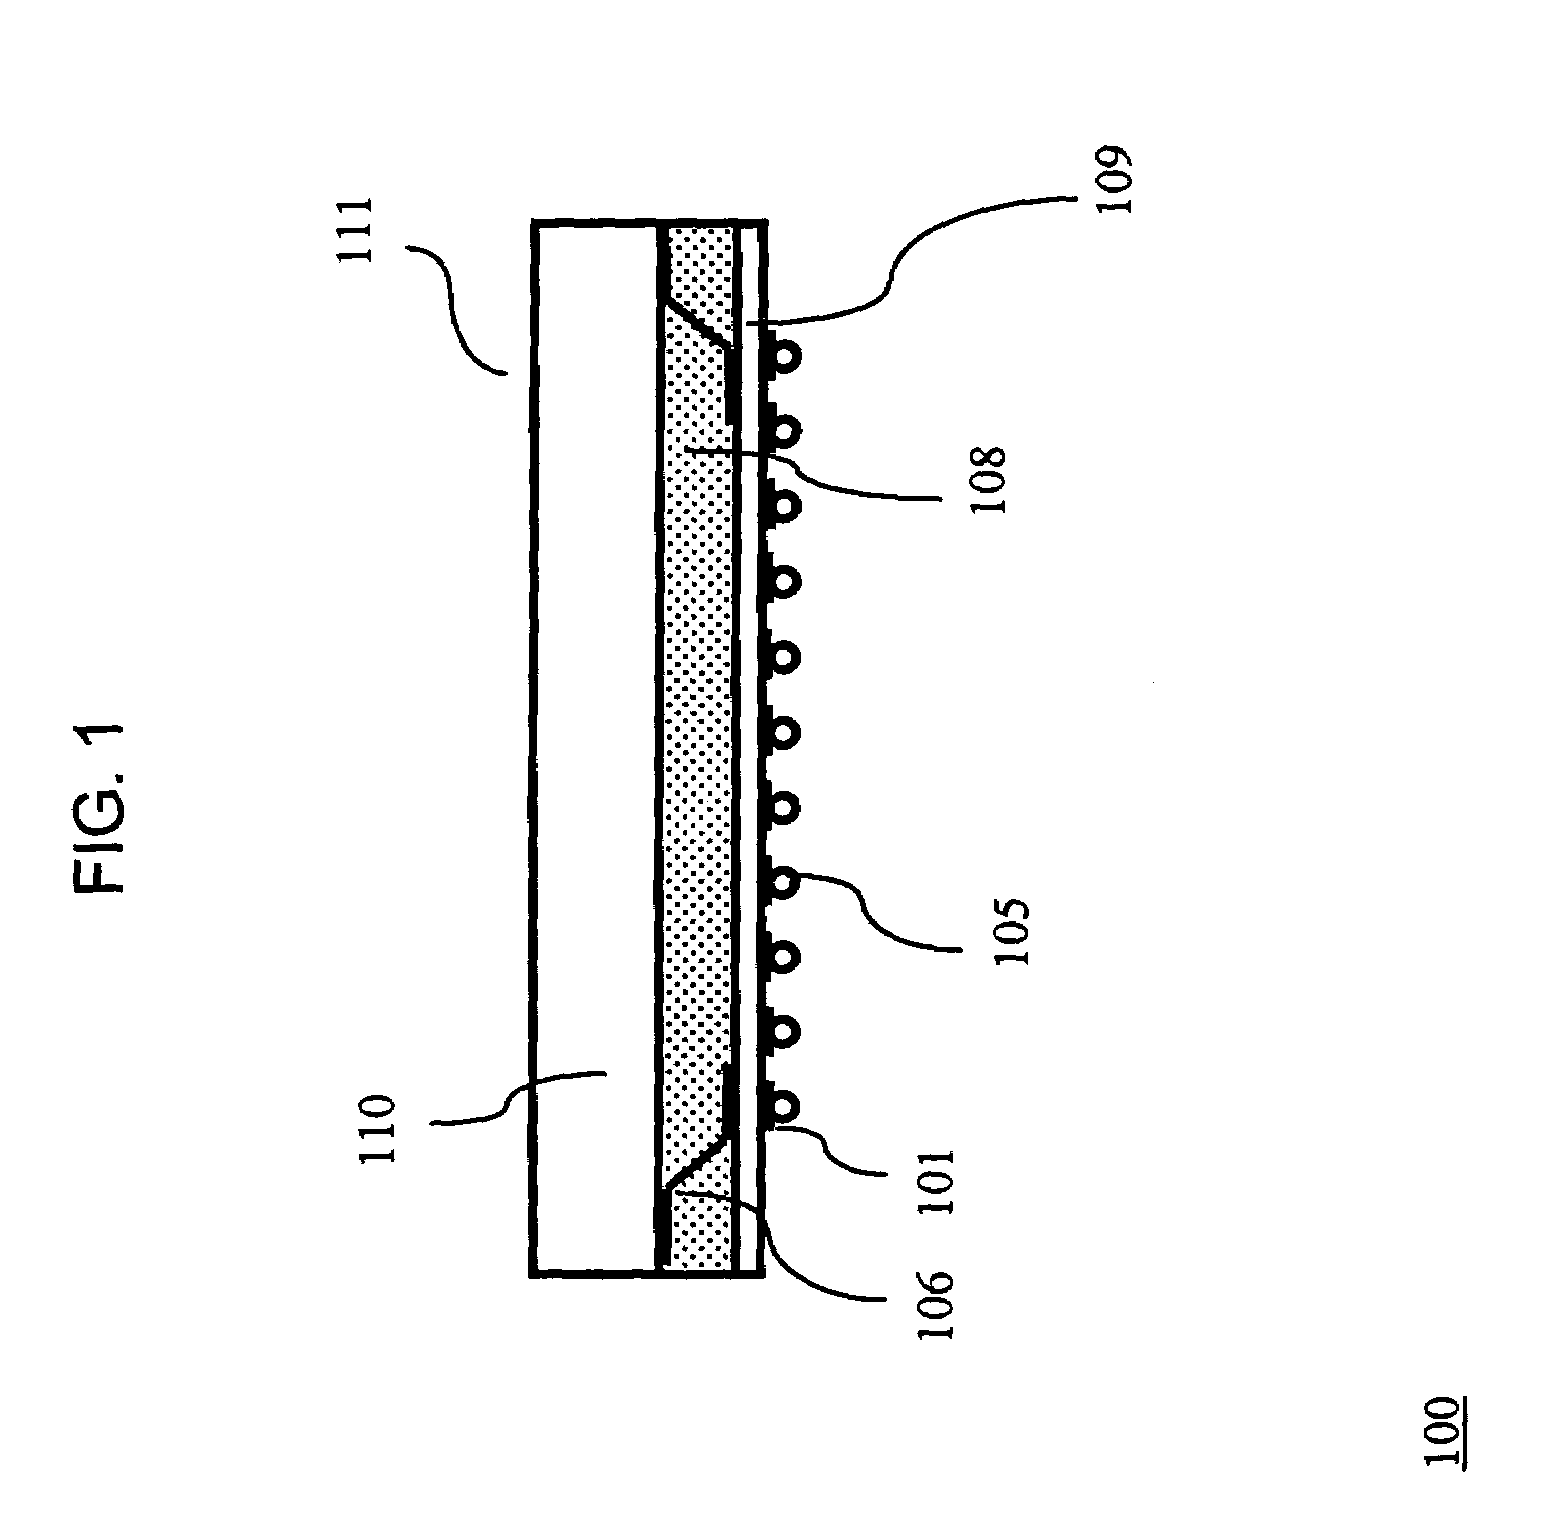 Components, methods and assemblies for multi-chip packages